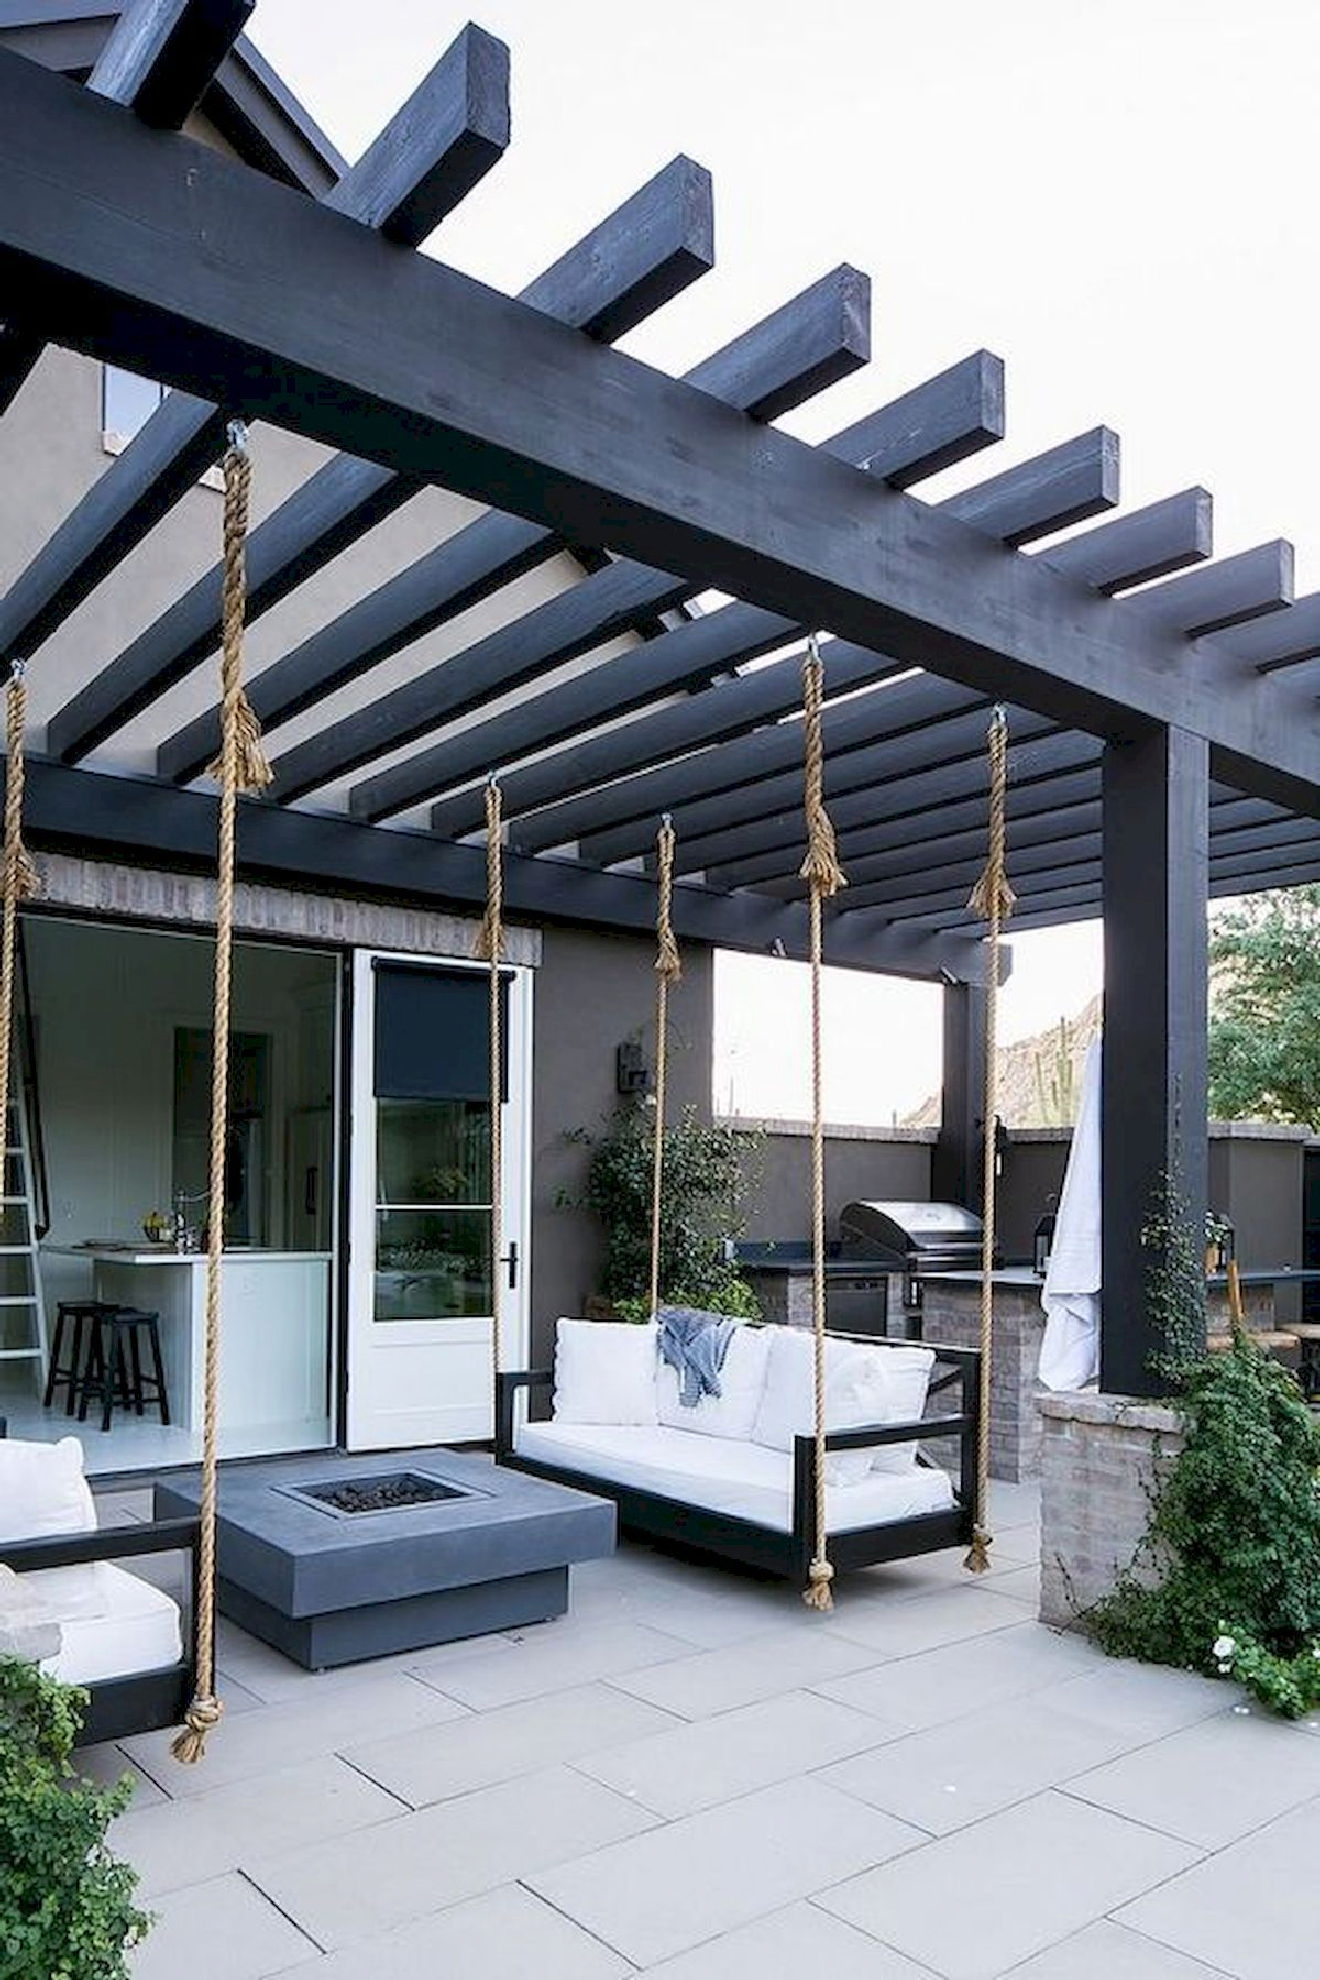 35 great pergola ideas with fireplace 35